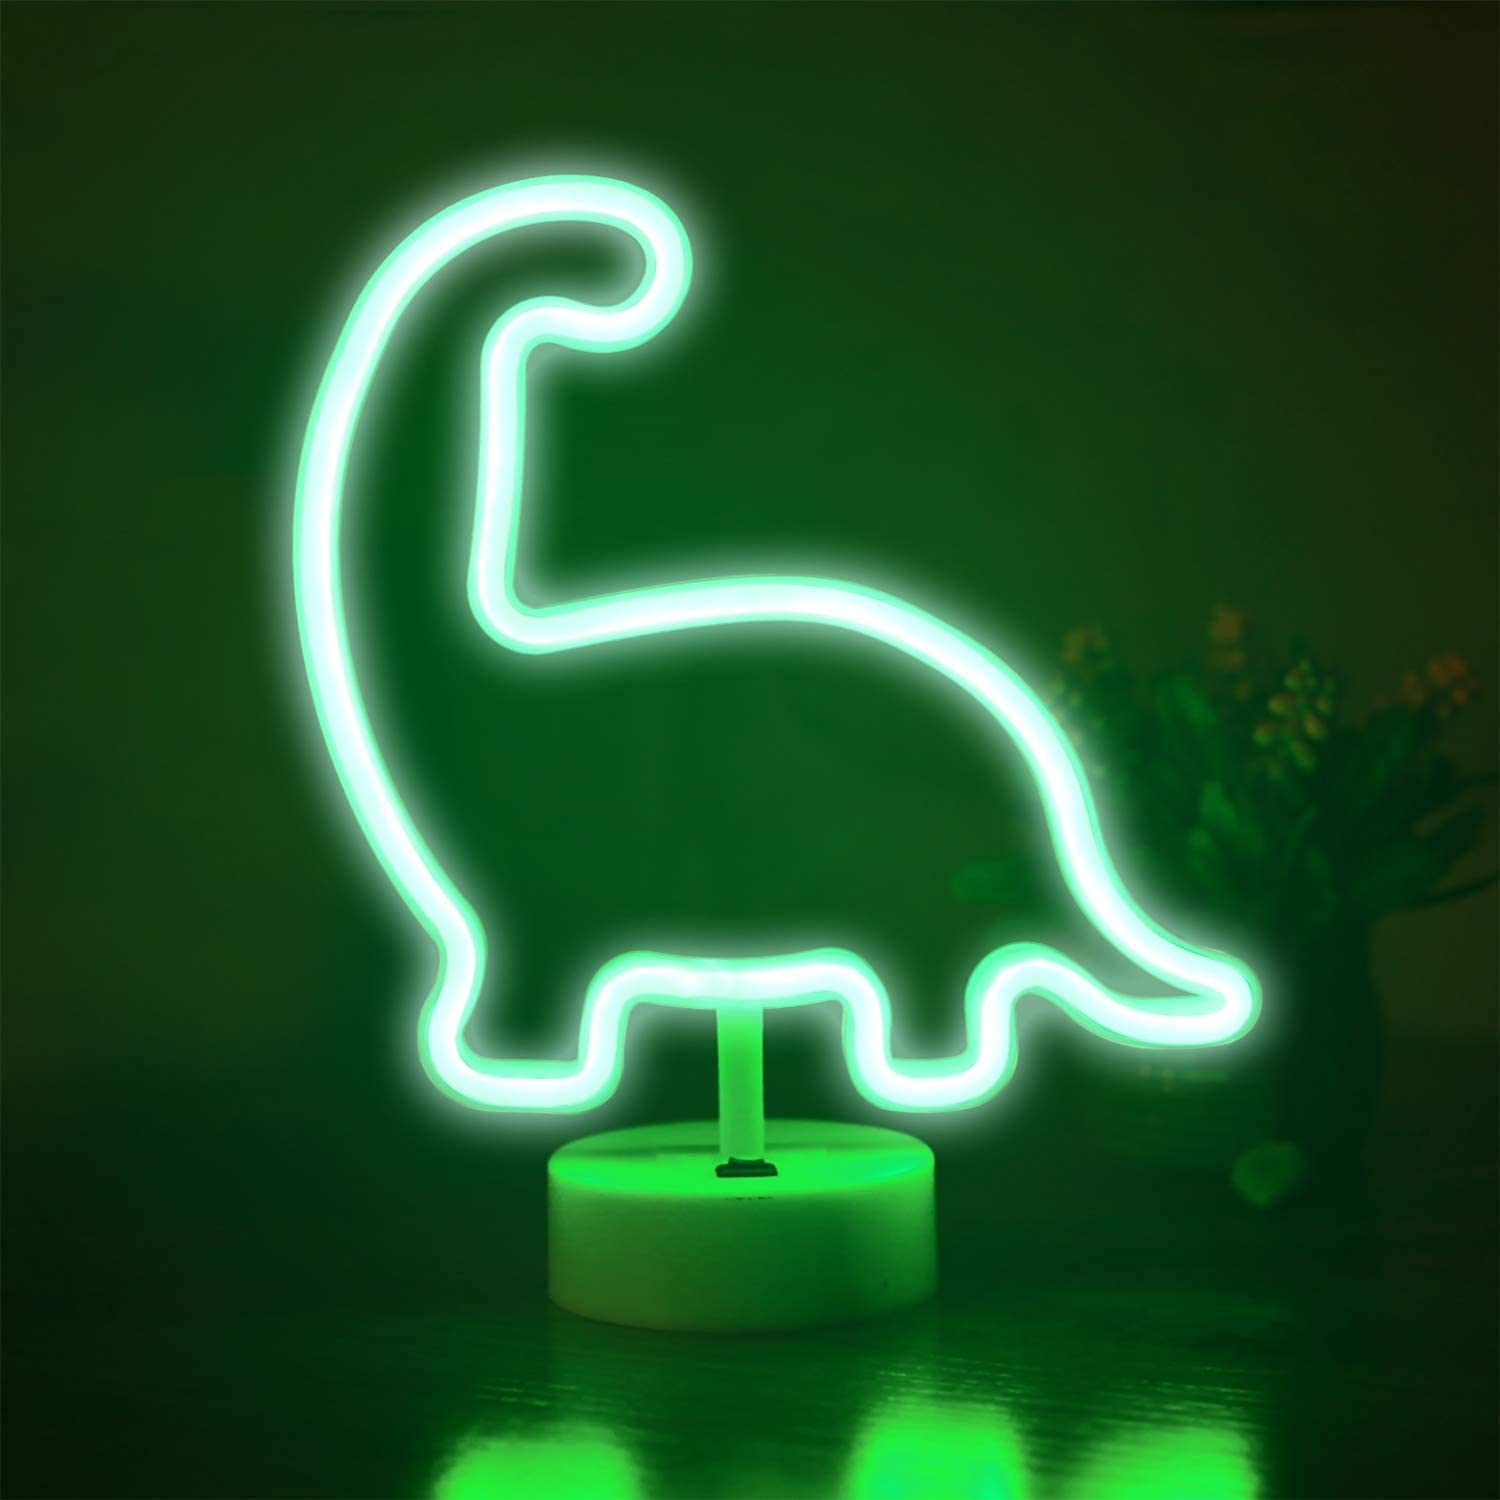 Buy Funpeny Dinosaur Neon Signs, LED Ramadan Festival Dinosaur Neon Lights, Ramadan Decor for Table, Desk, Indoors, Home Bedroom Decorations USB Charging & Battery Online in Indonesia. B08CRS9WY6